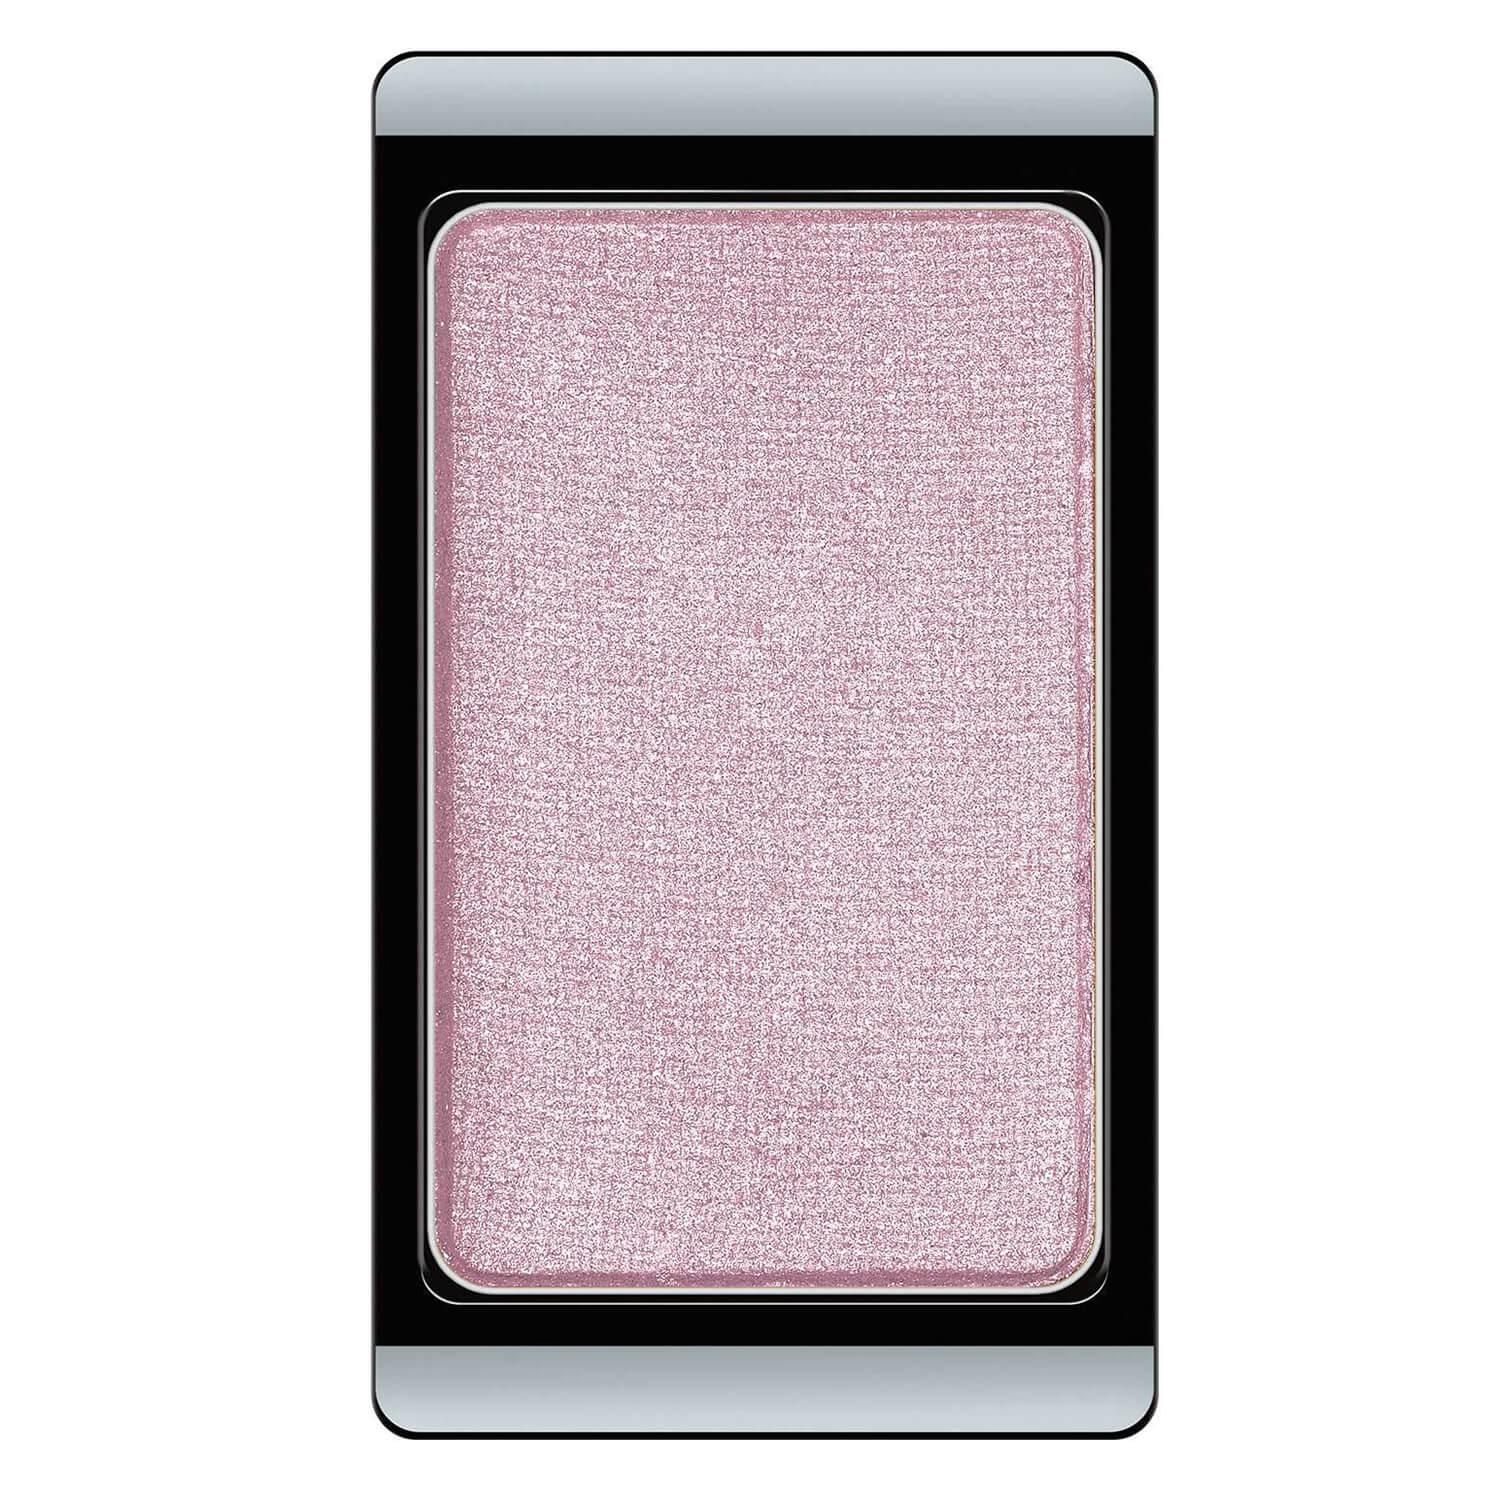 Eyeshadow Pearl - Pearly Muted Rose 116